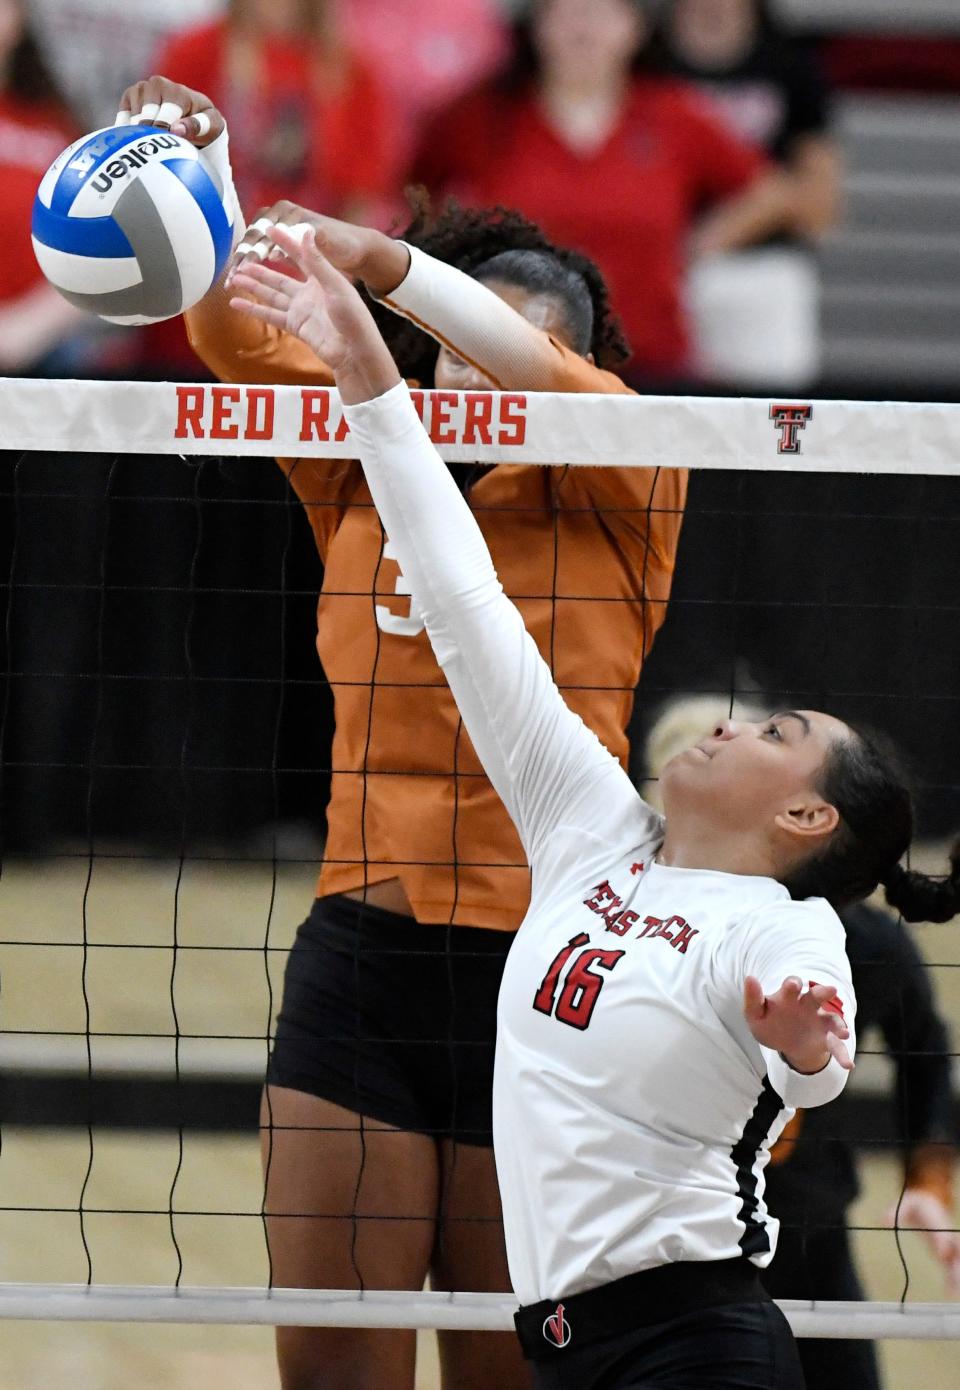 Texas' Logan Eggleston, top, blocks the ball against Texas Tech in a Big 12 volleyball match, Sunday, Oct. 2, 2022, at United Supermarkets Arena.